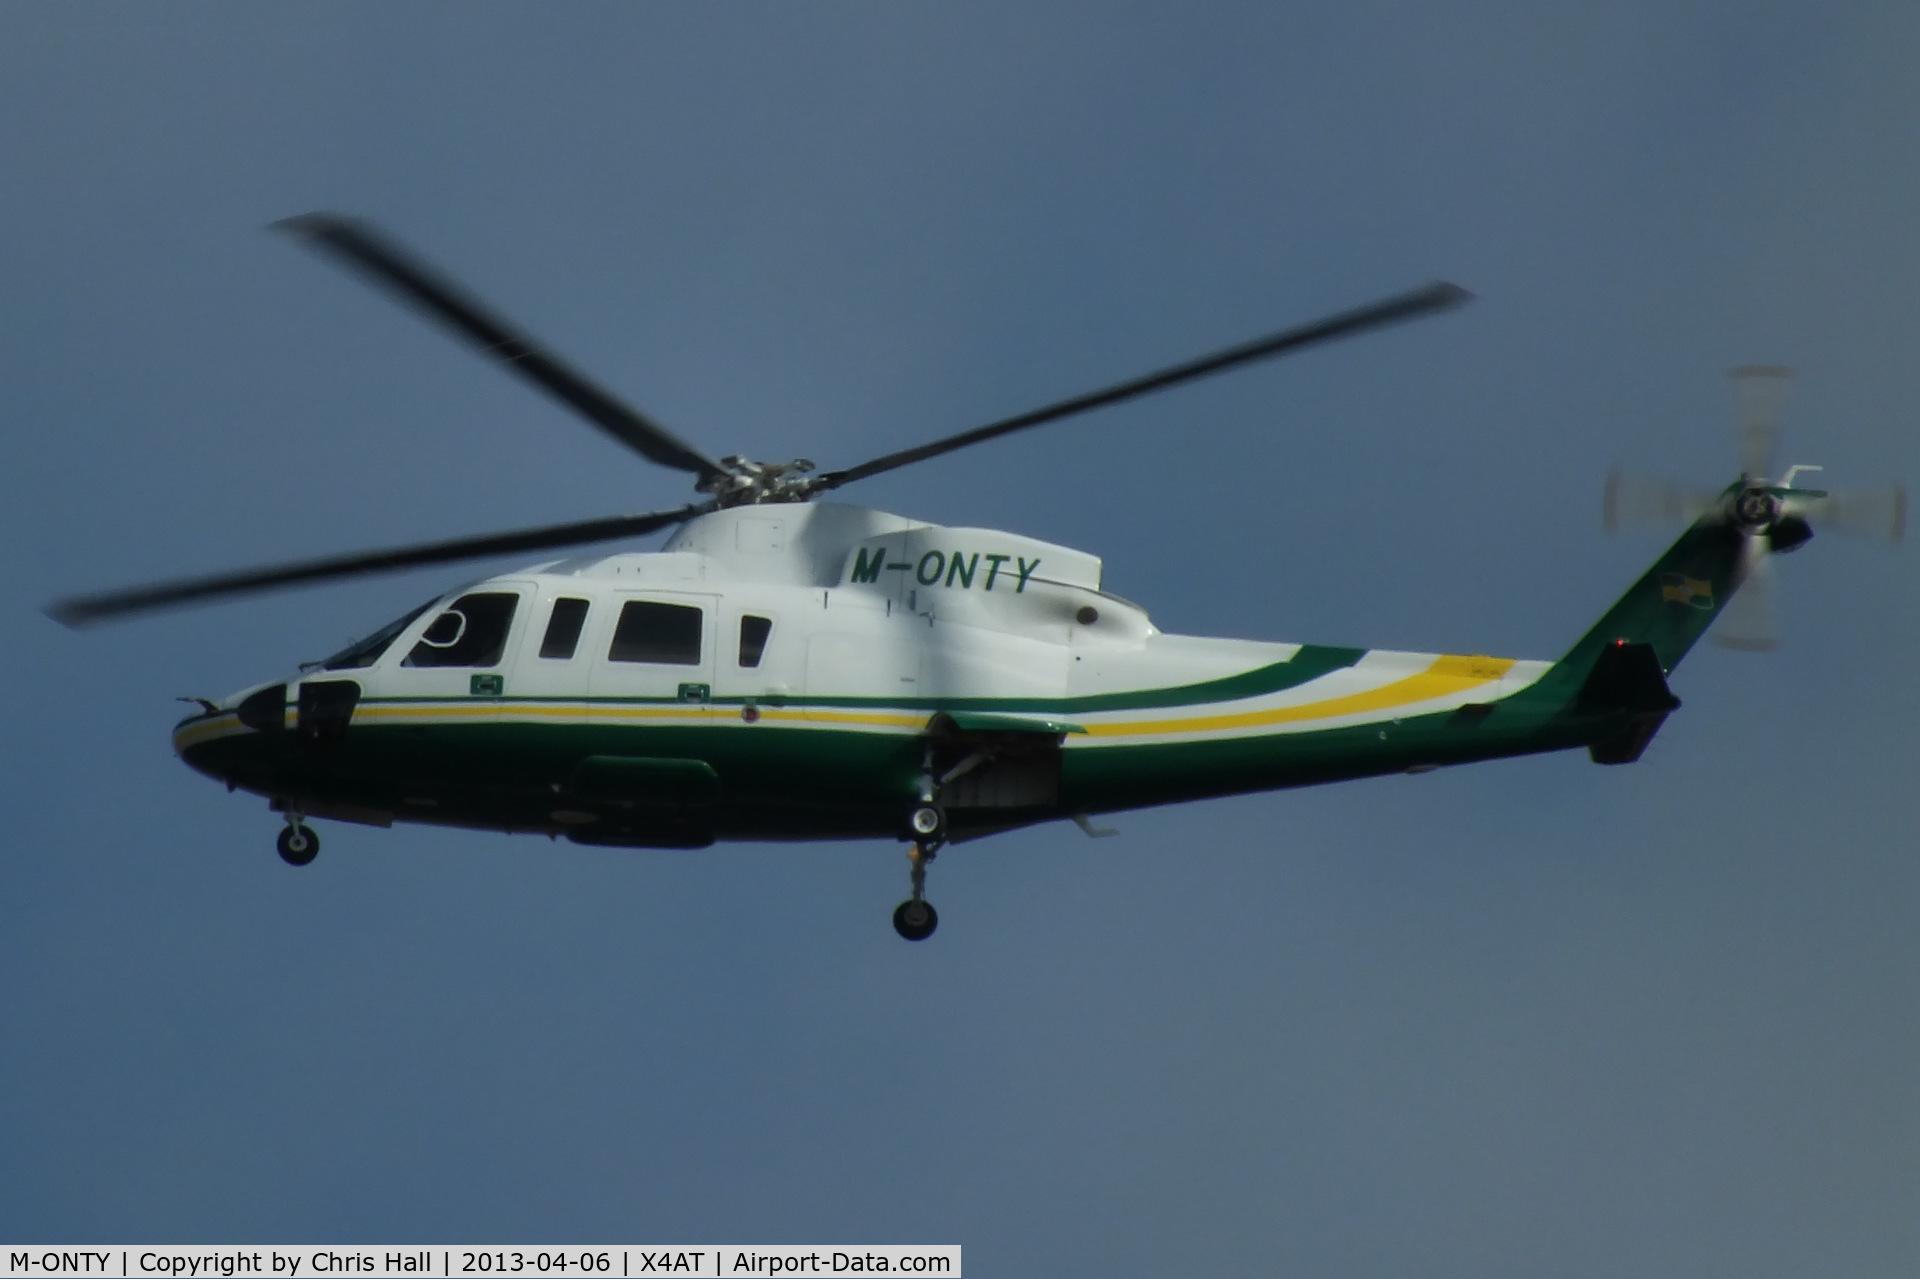 M-ONTY, 2007 Sikorsky S-76C C/N 760696, Ferrying racegoers into Aintree for the 2013 Grand National